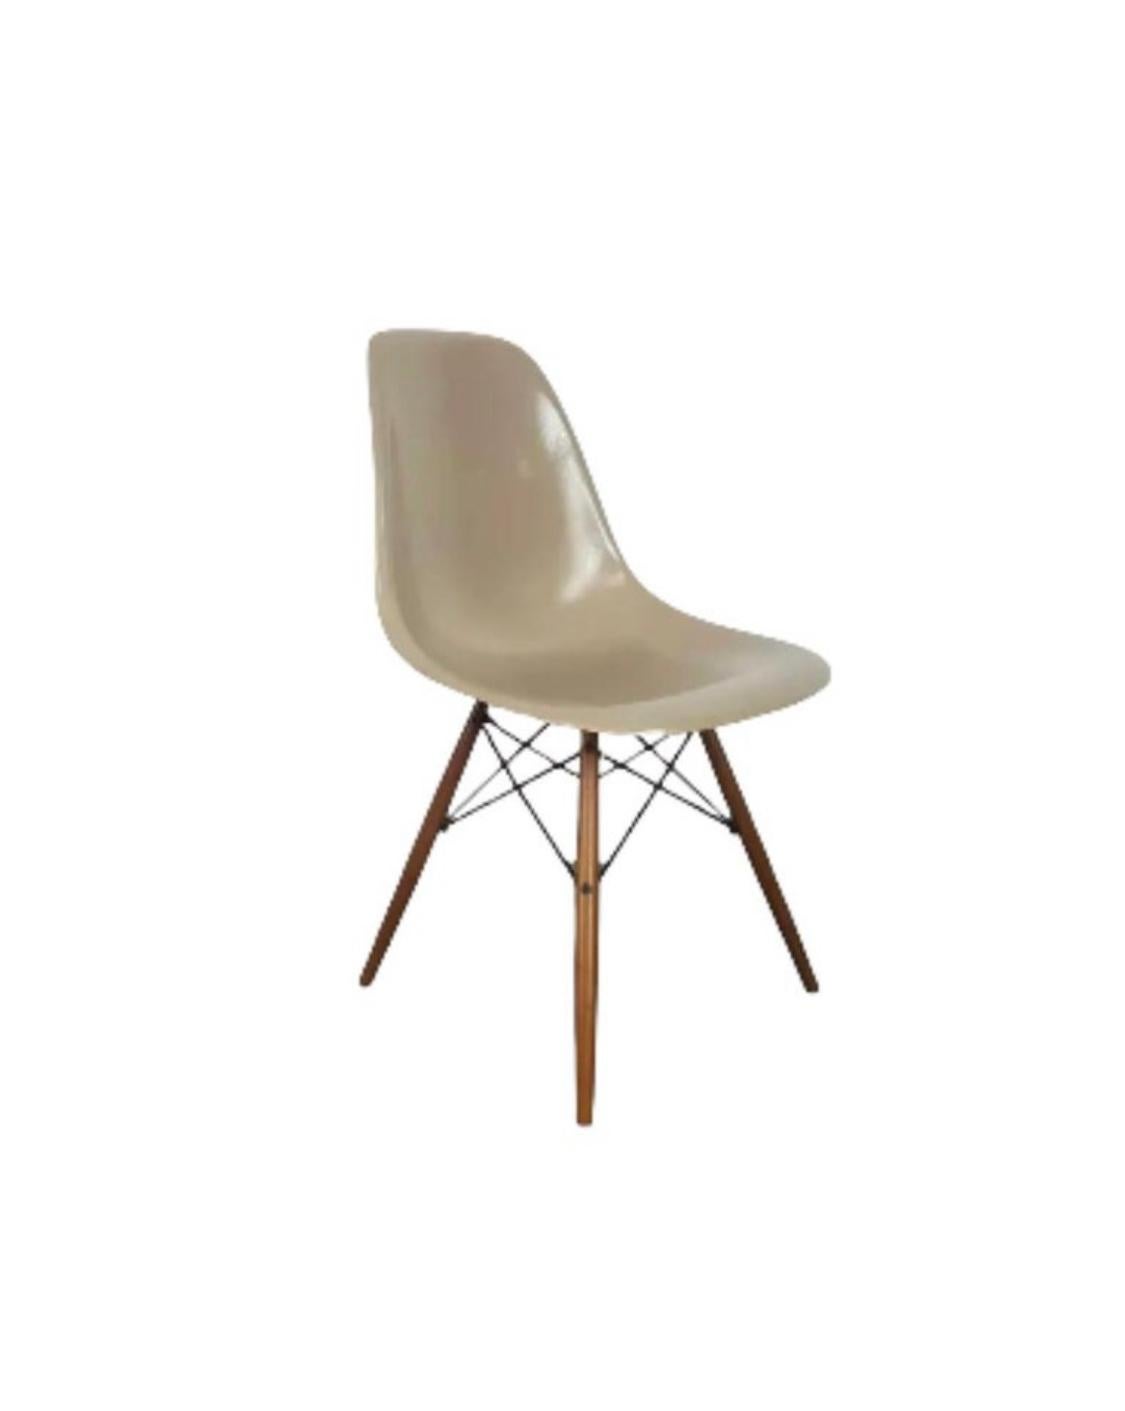 Mid-Century Modern Eames Fiberglass Shell Dining Chairs by Herman Miller